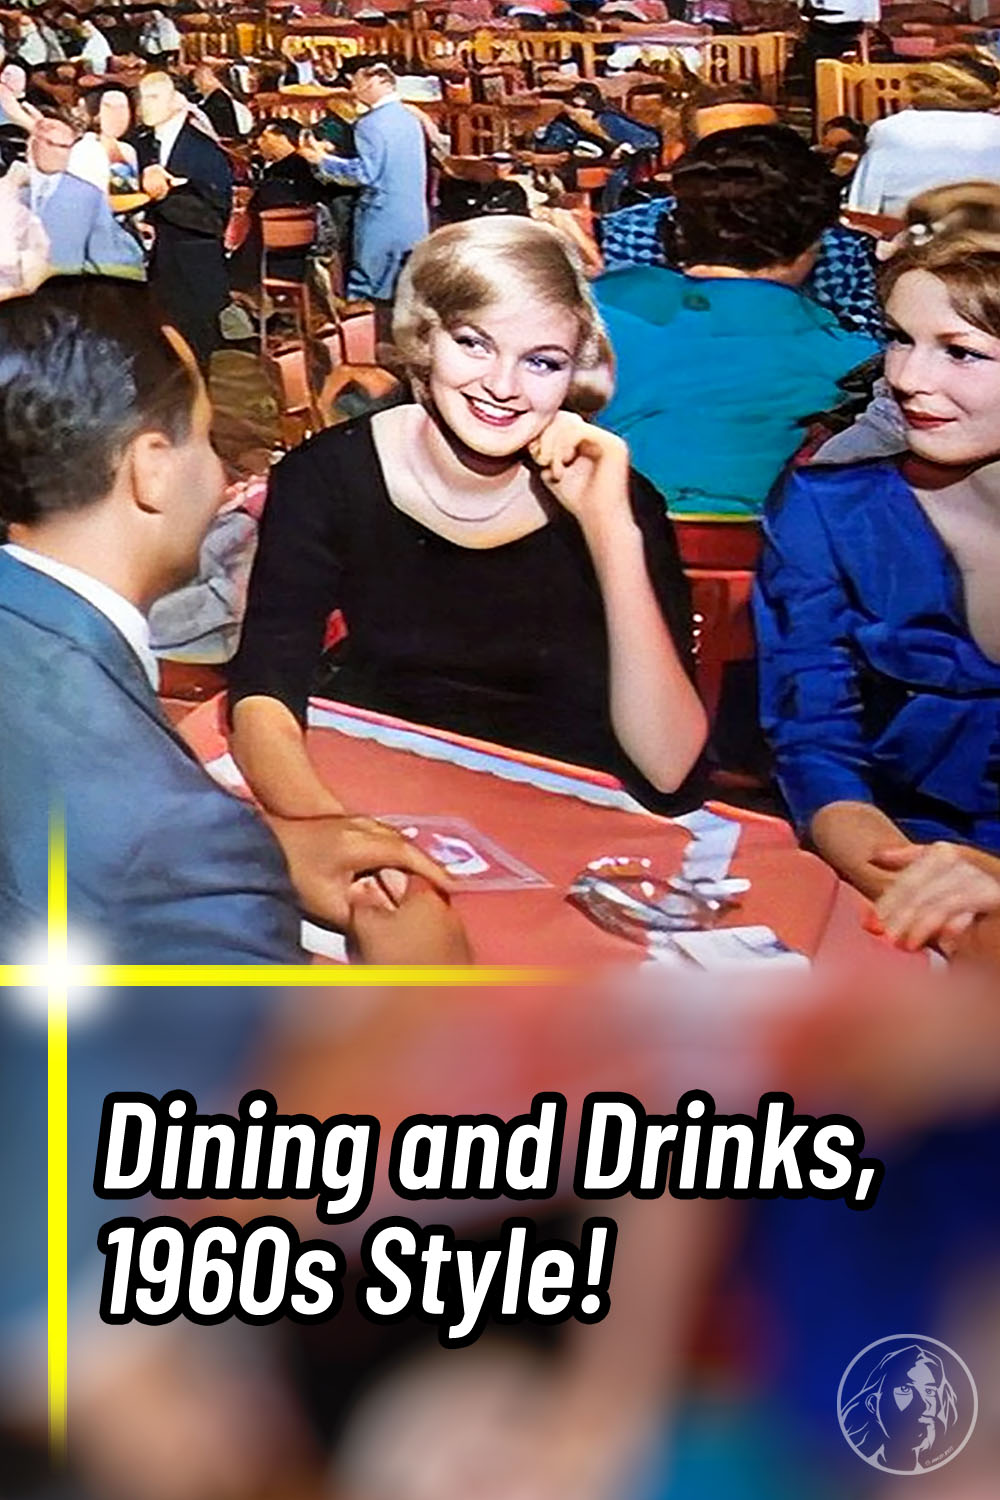 Dining and Drinks, 1960s Style!